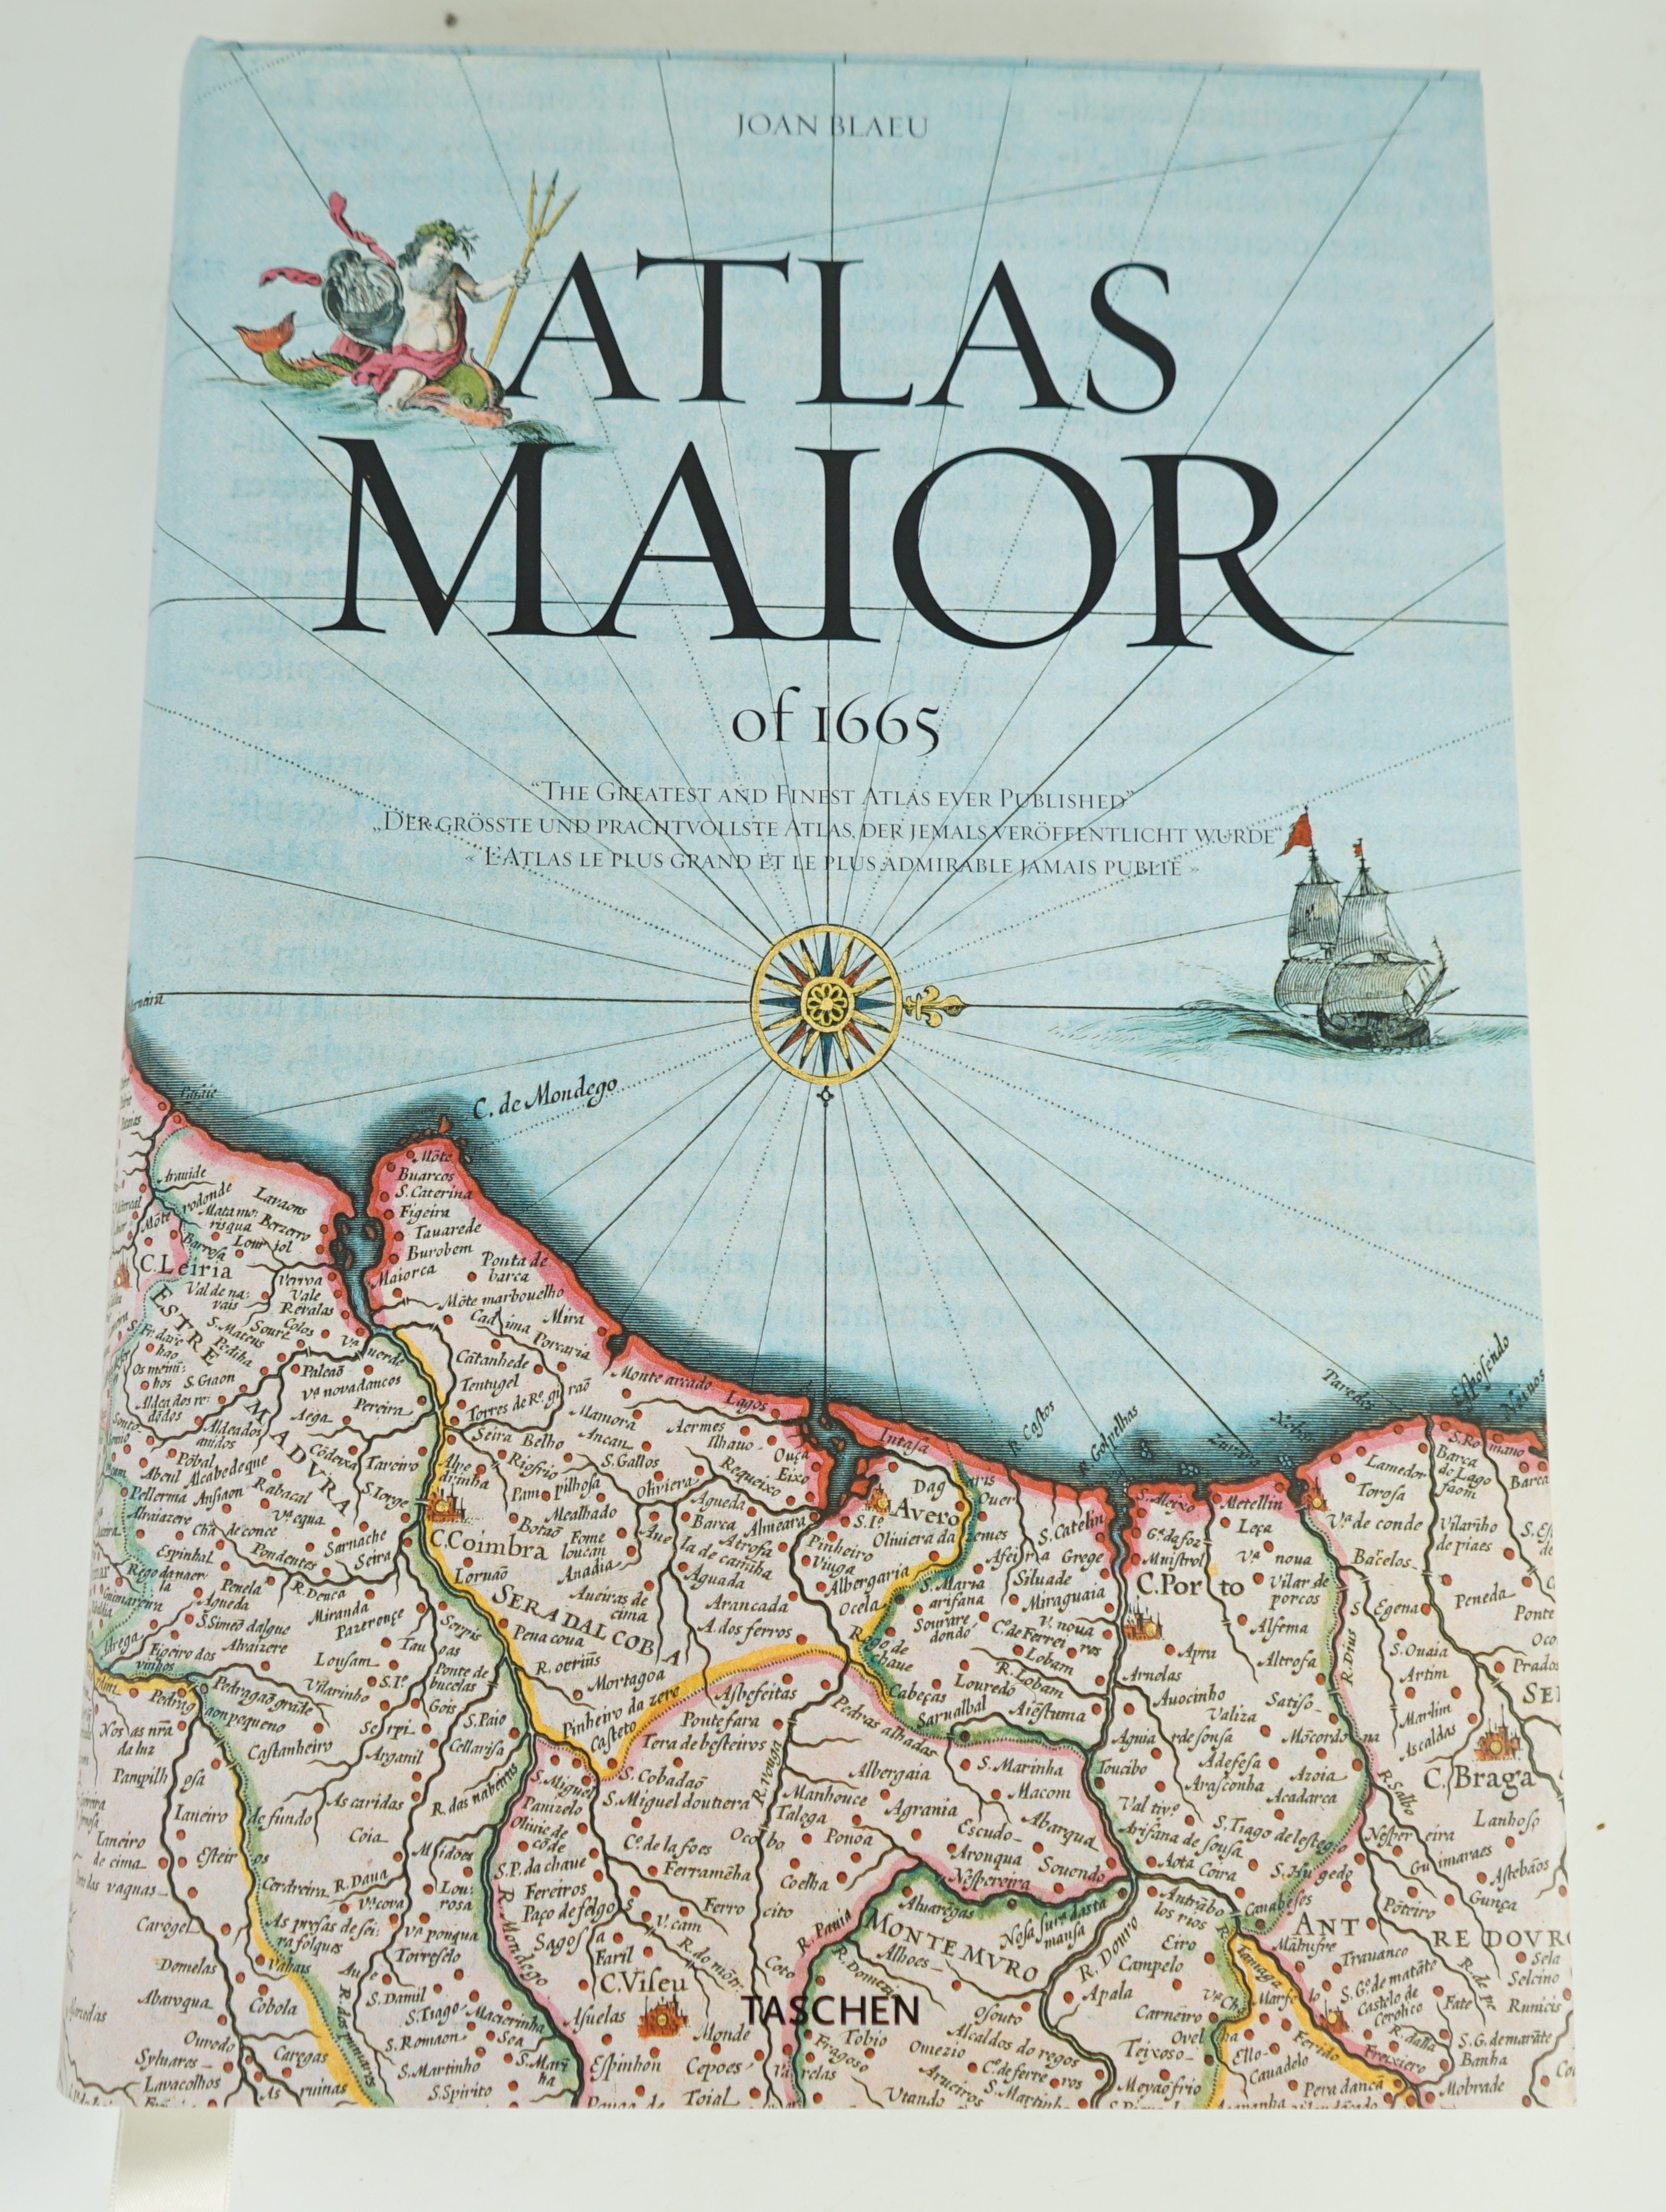 Blaeu, Joan - Atlas Major of 1665 ... introduction and texts by Peter Van Der Krogt ... (new edition) with coloured maps throughout (incl. full, double-page and folded), with a portrait of the cartographer and some other